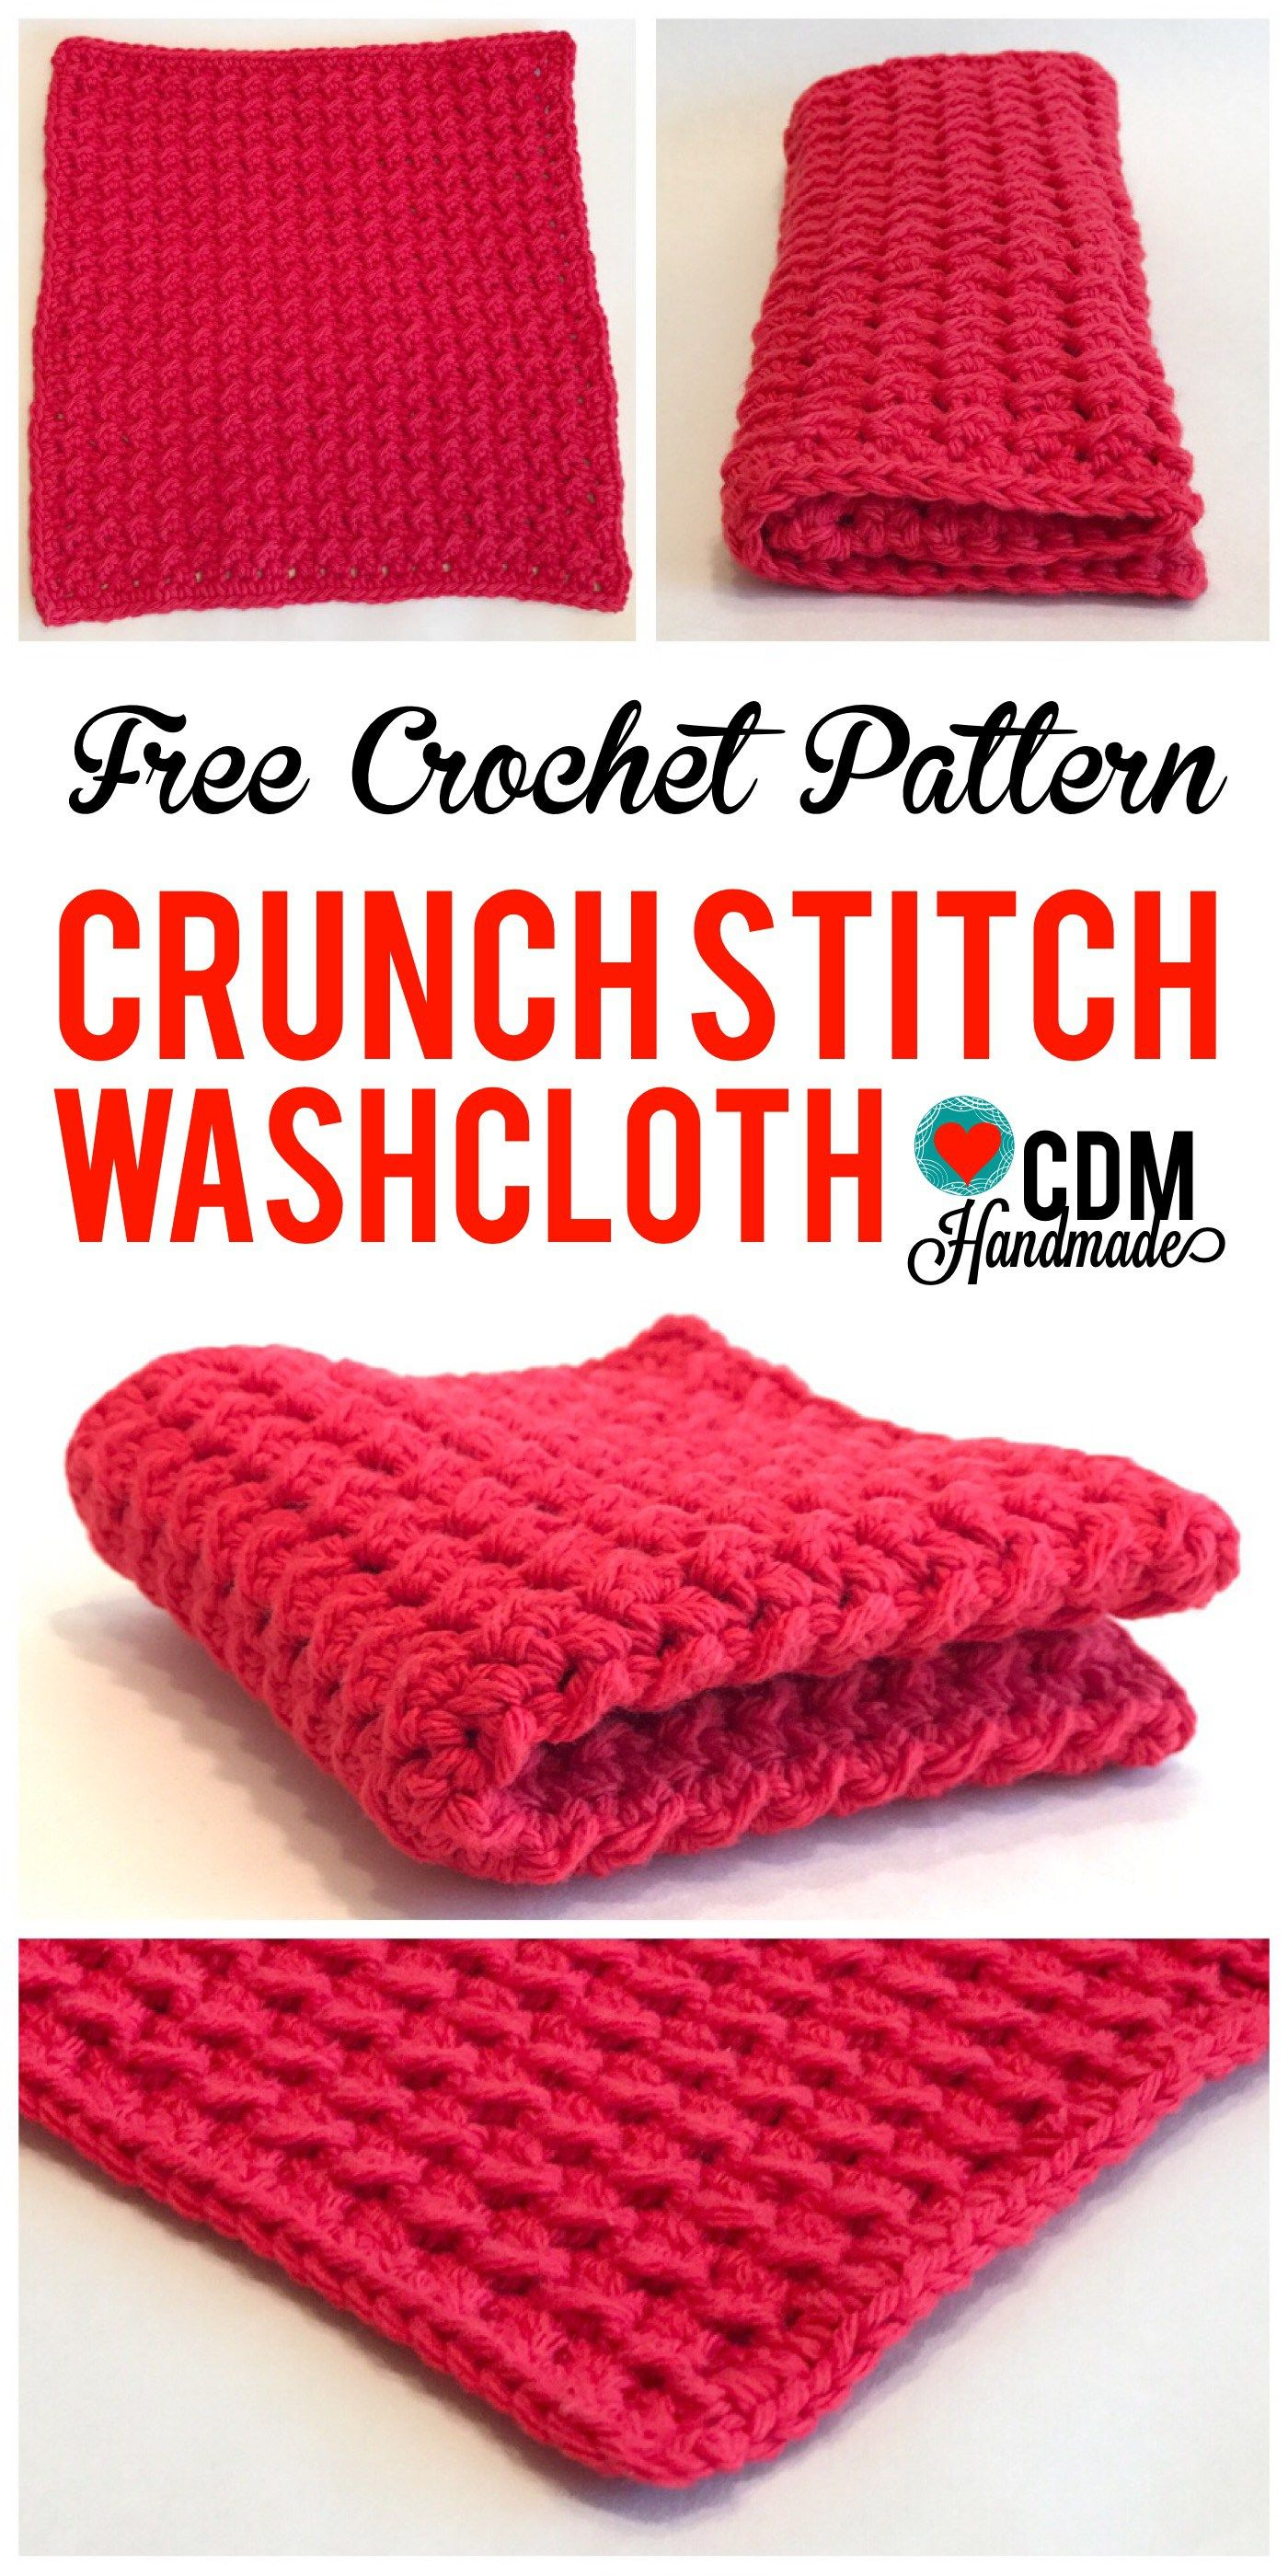 Crochet Dishcloth Pattern Check Out This Quick And Easy Free Crochet Washcloth Pattern For My